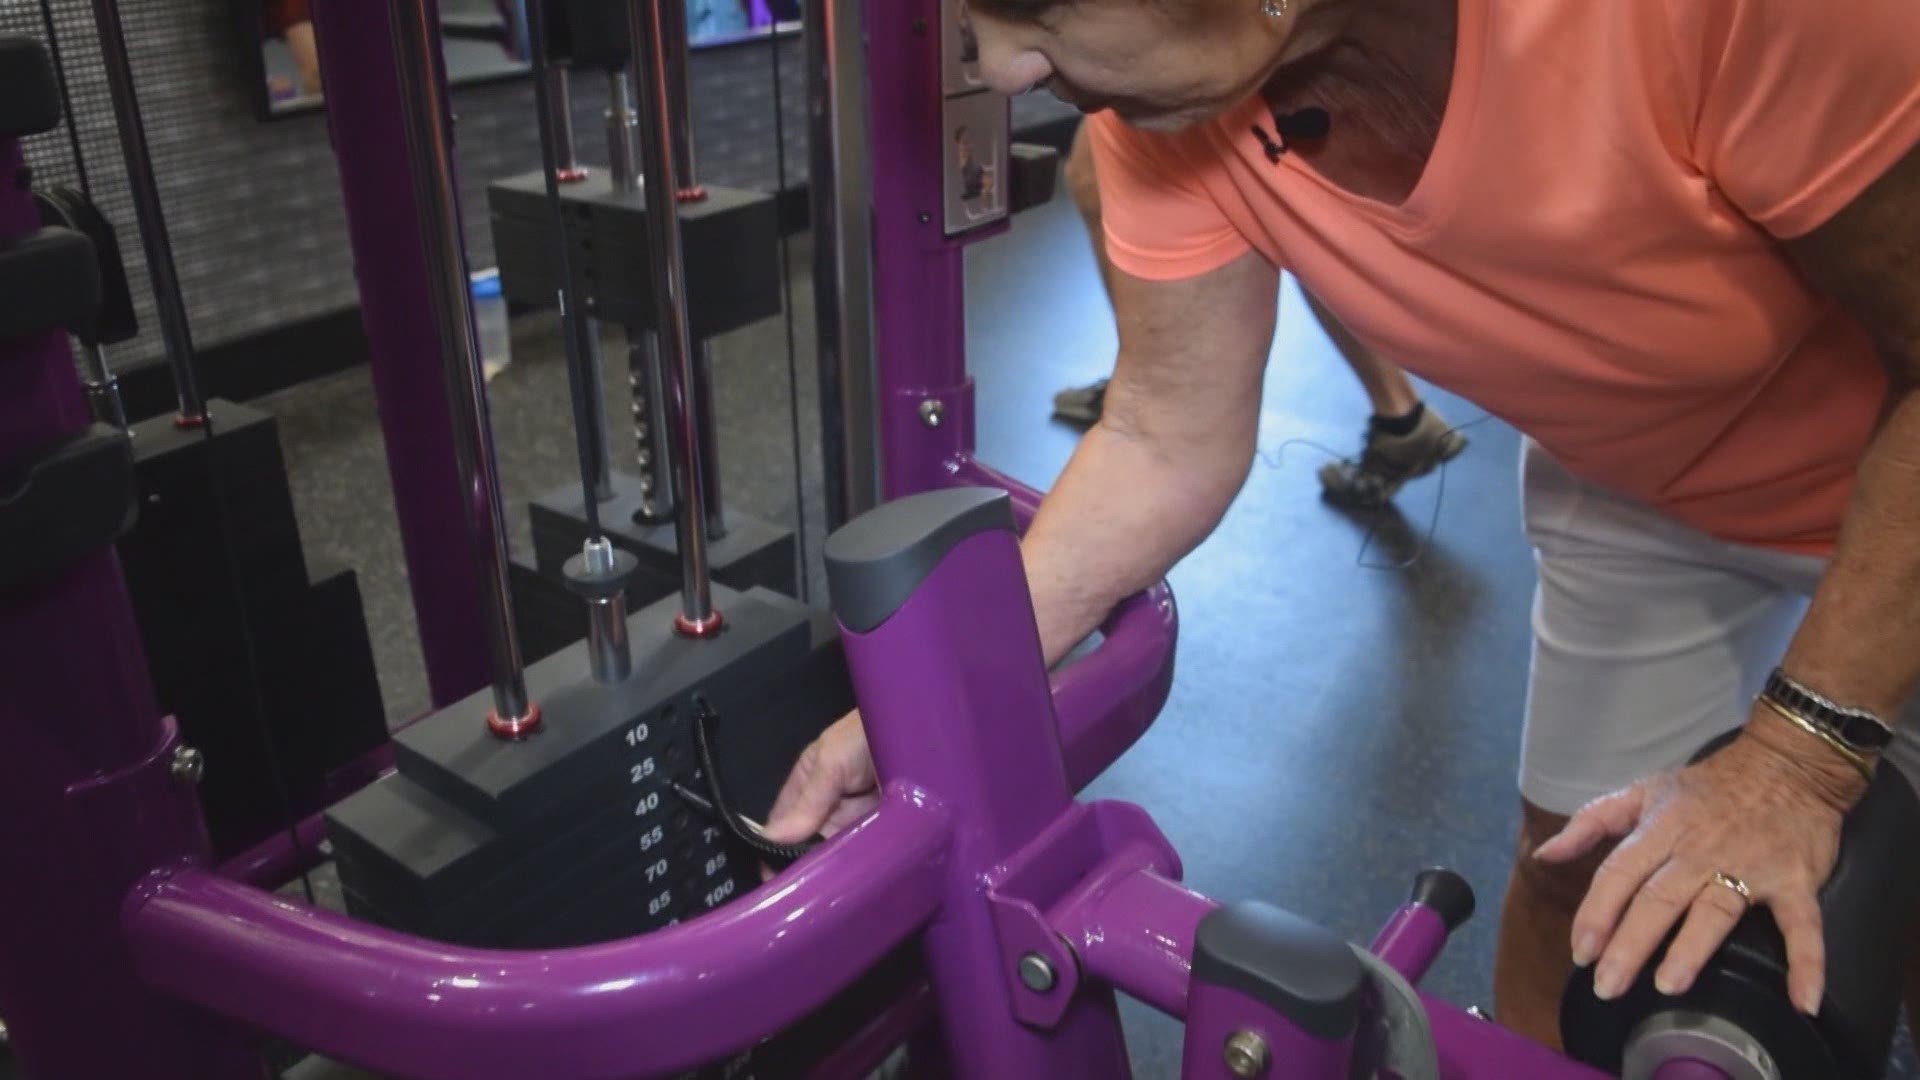 According to a certified trainer from Planet Fitness, there are three bad workout habits that could be preventing you from getting the results you want in the gym: